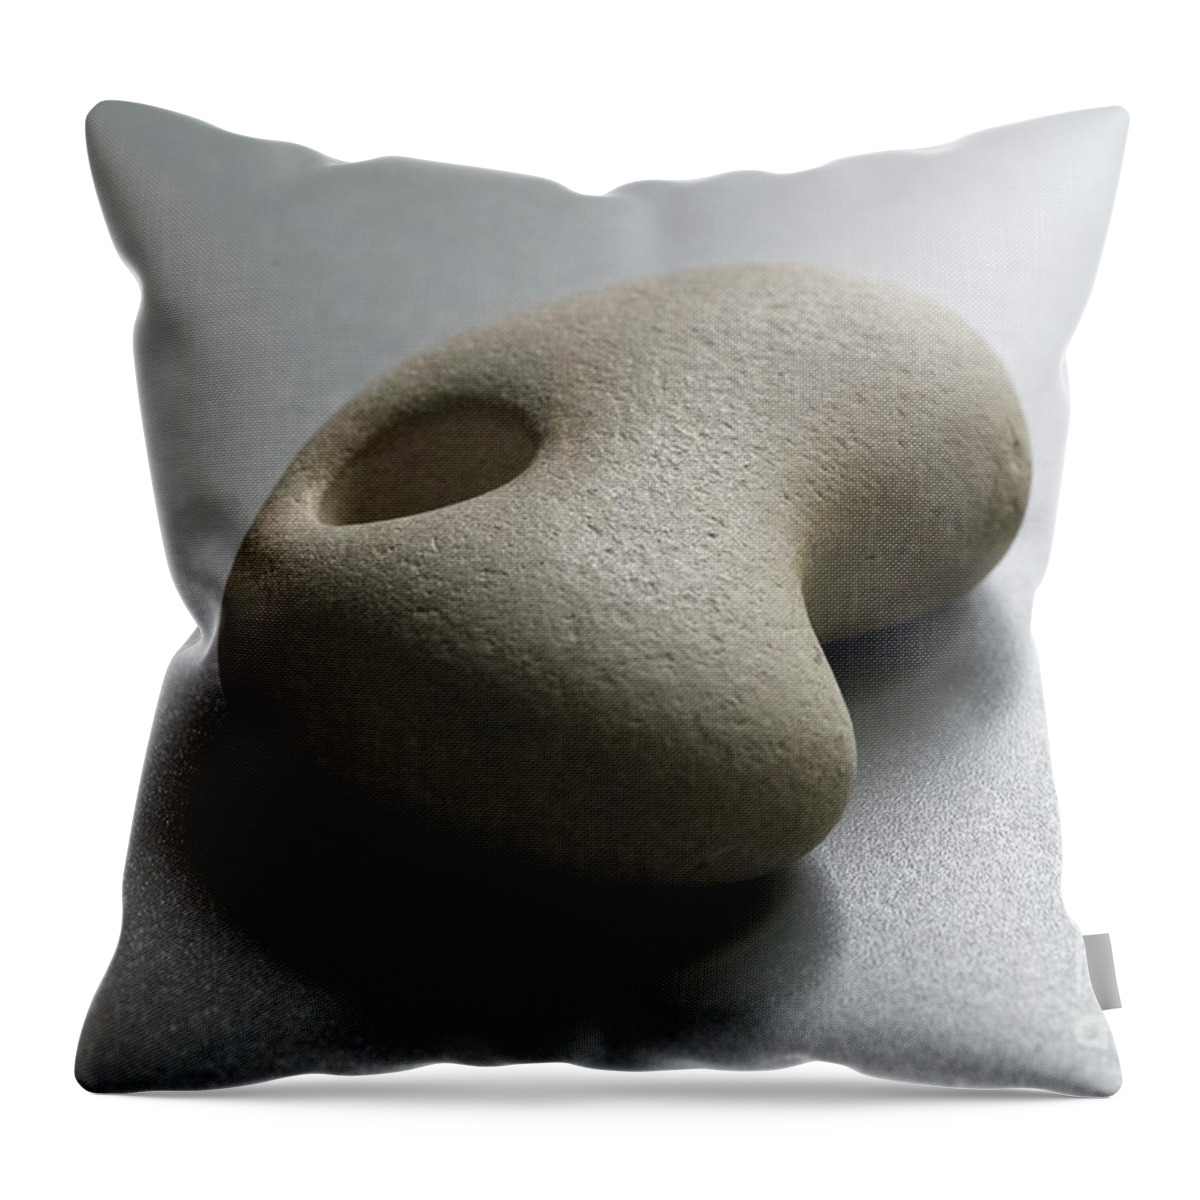 Artifact Throw Pillow featuring the photograph Ancient Artifact by Phil Perkins